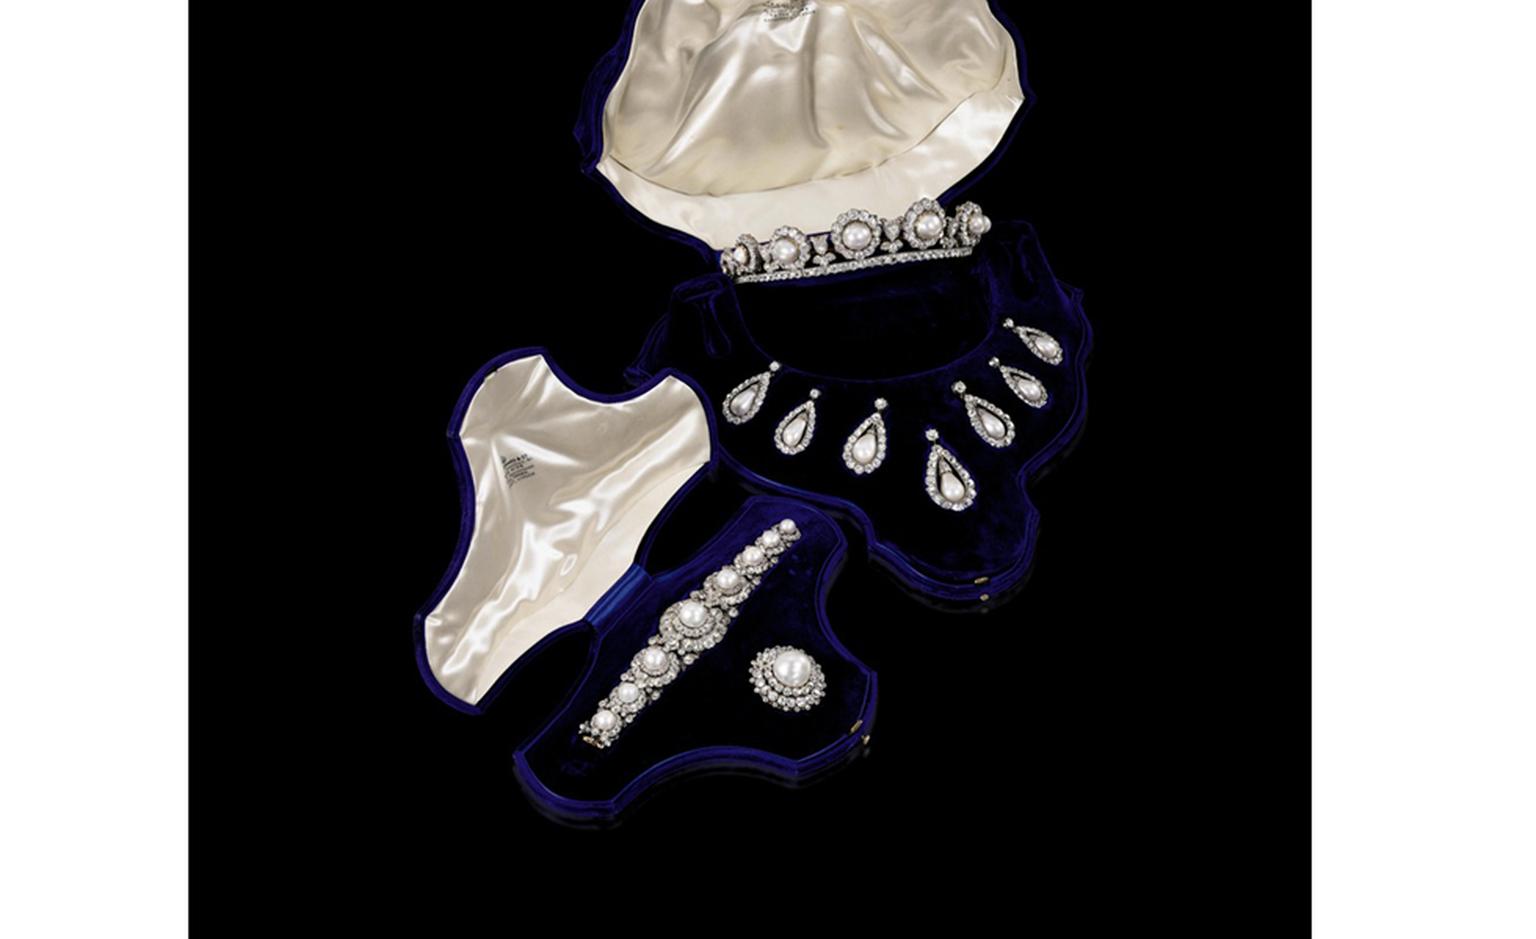 The Rosebery natural pearl and diamond tiara, bracelet and brooch in their case and demonstrating how the seven pearls can be detached from the tiara.